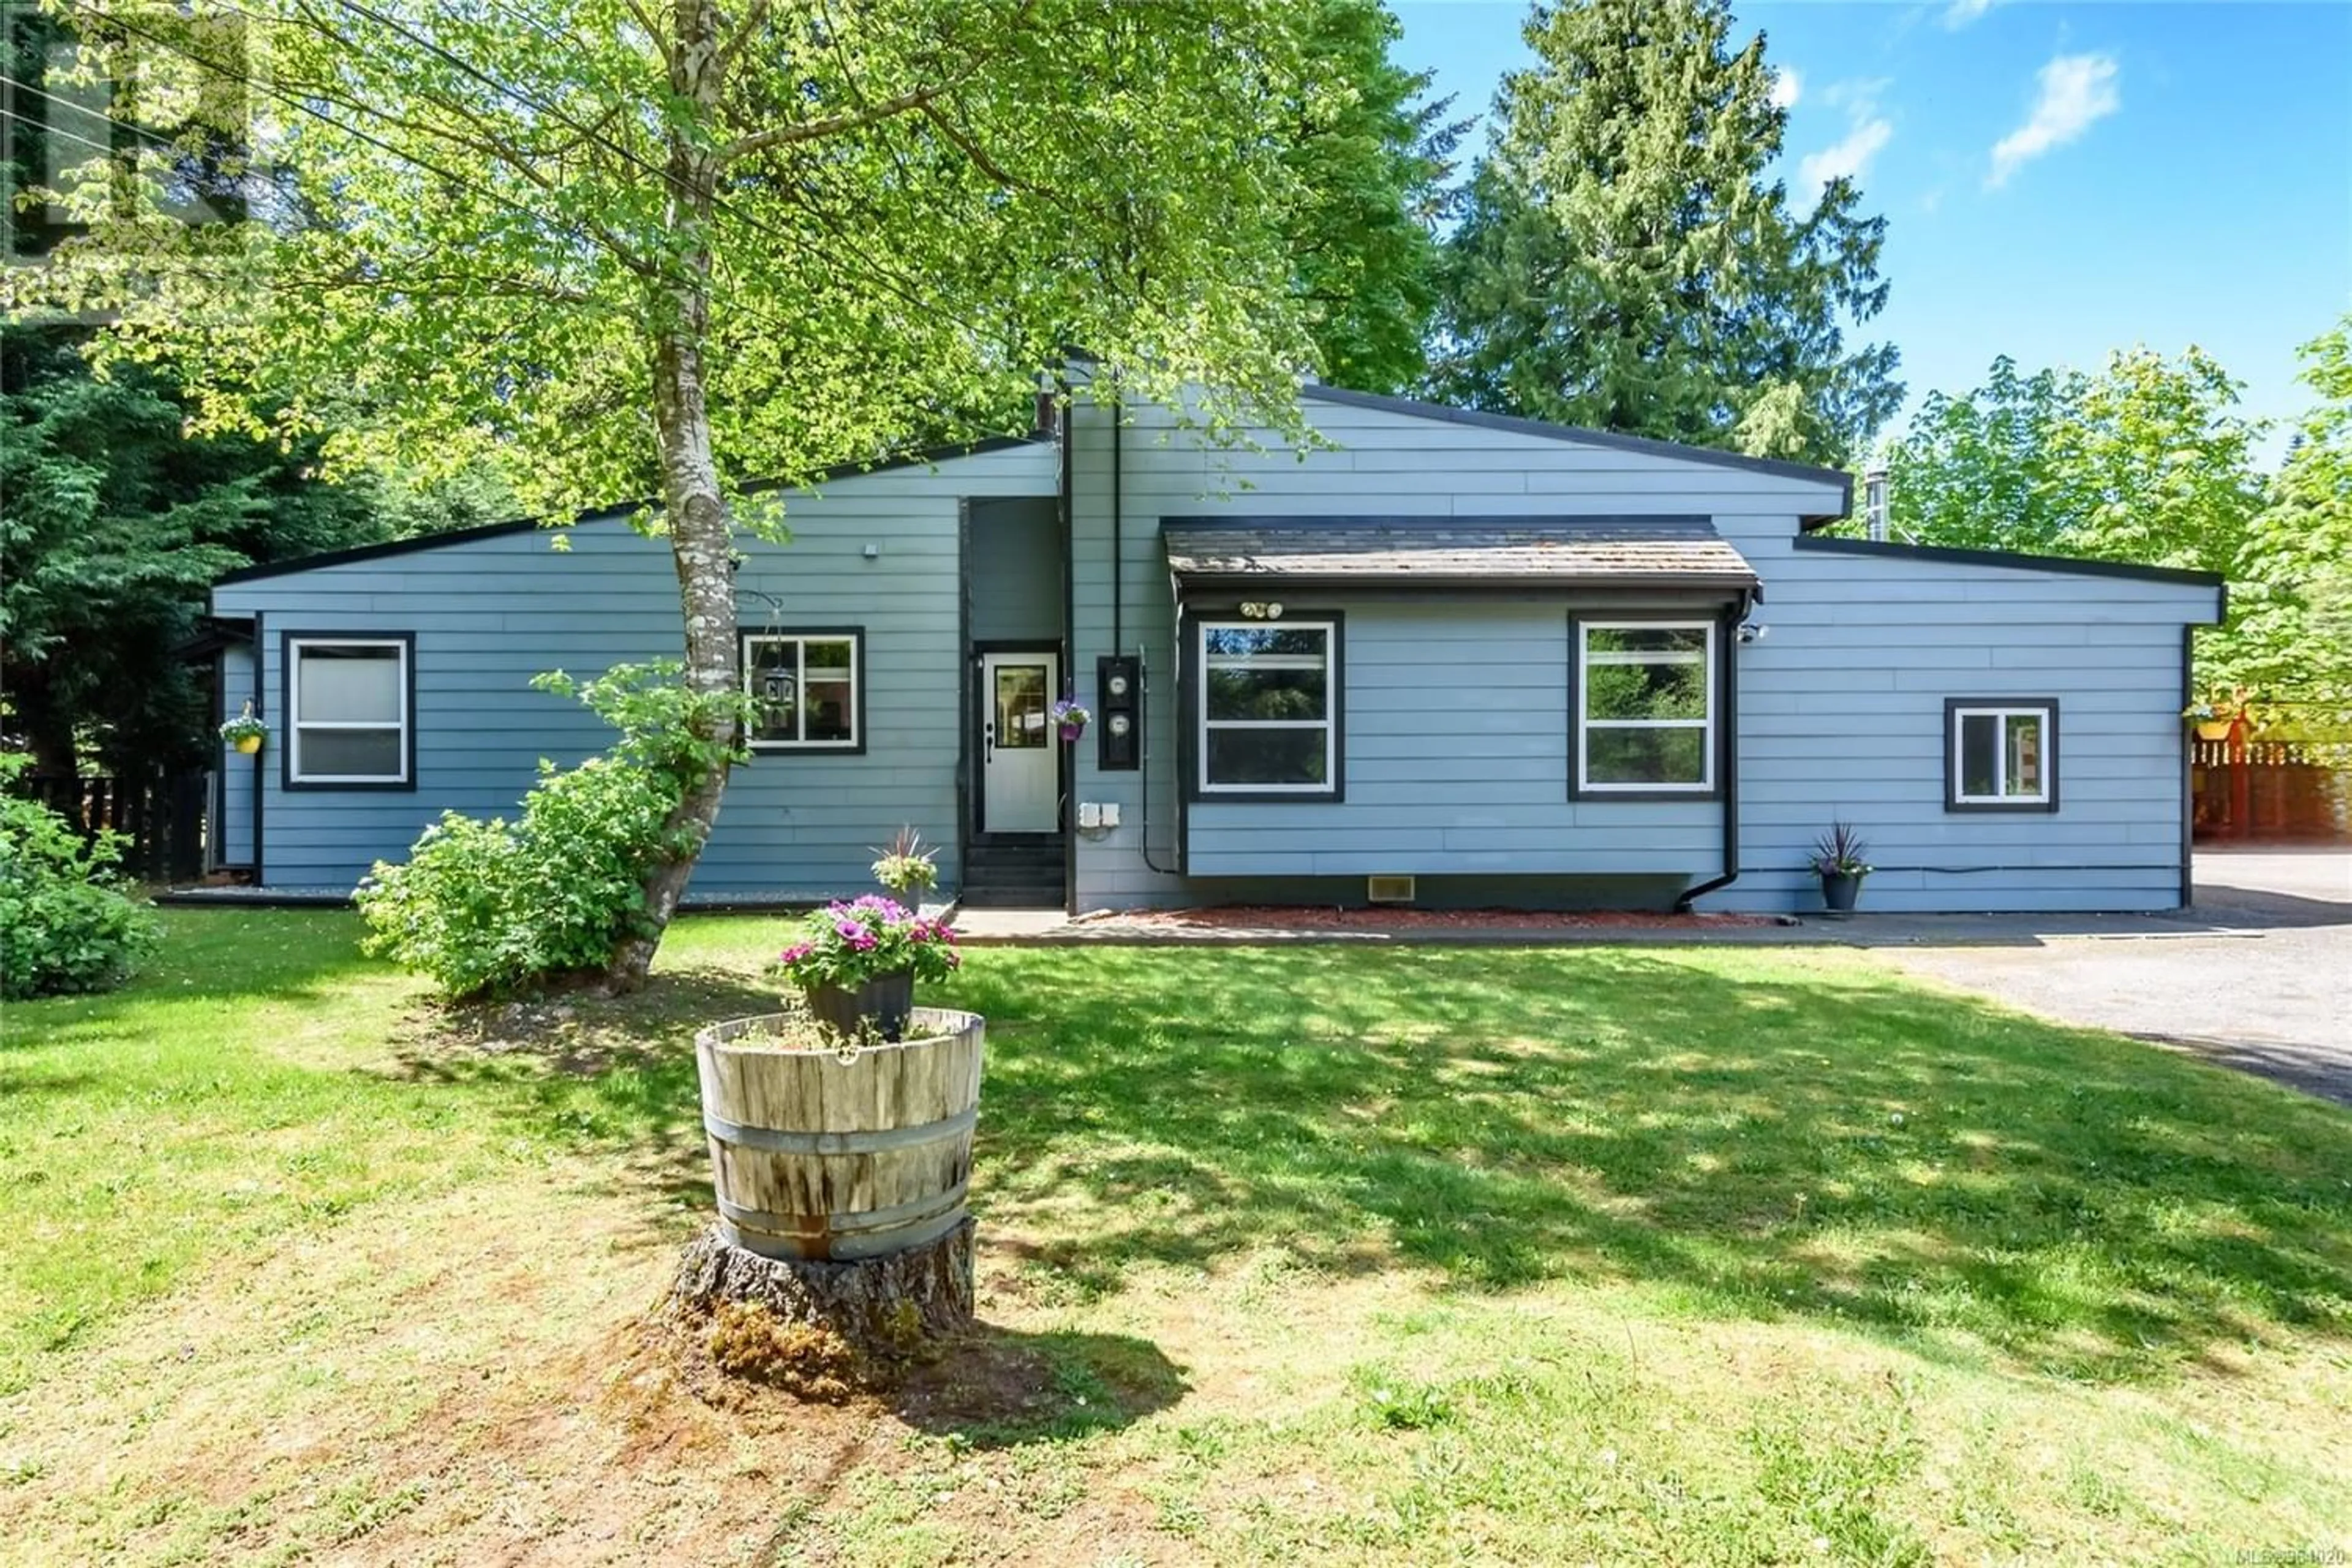 Home with vinyl exterior material for 1307 Anderton Rd, Comox British Columbia V9M3Z2